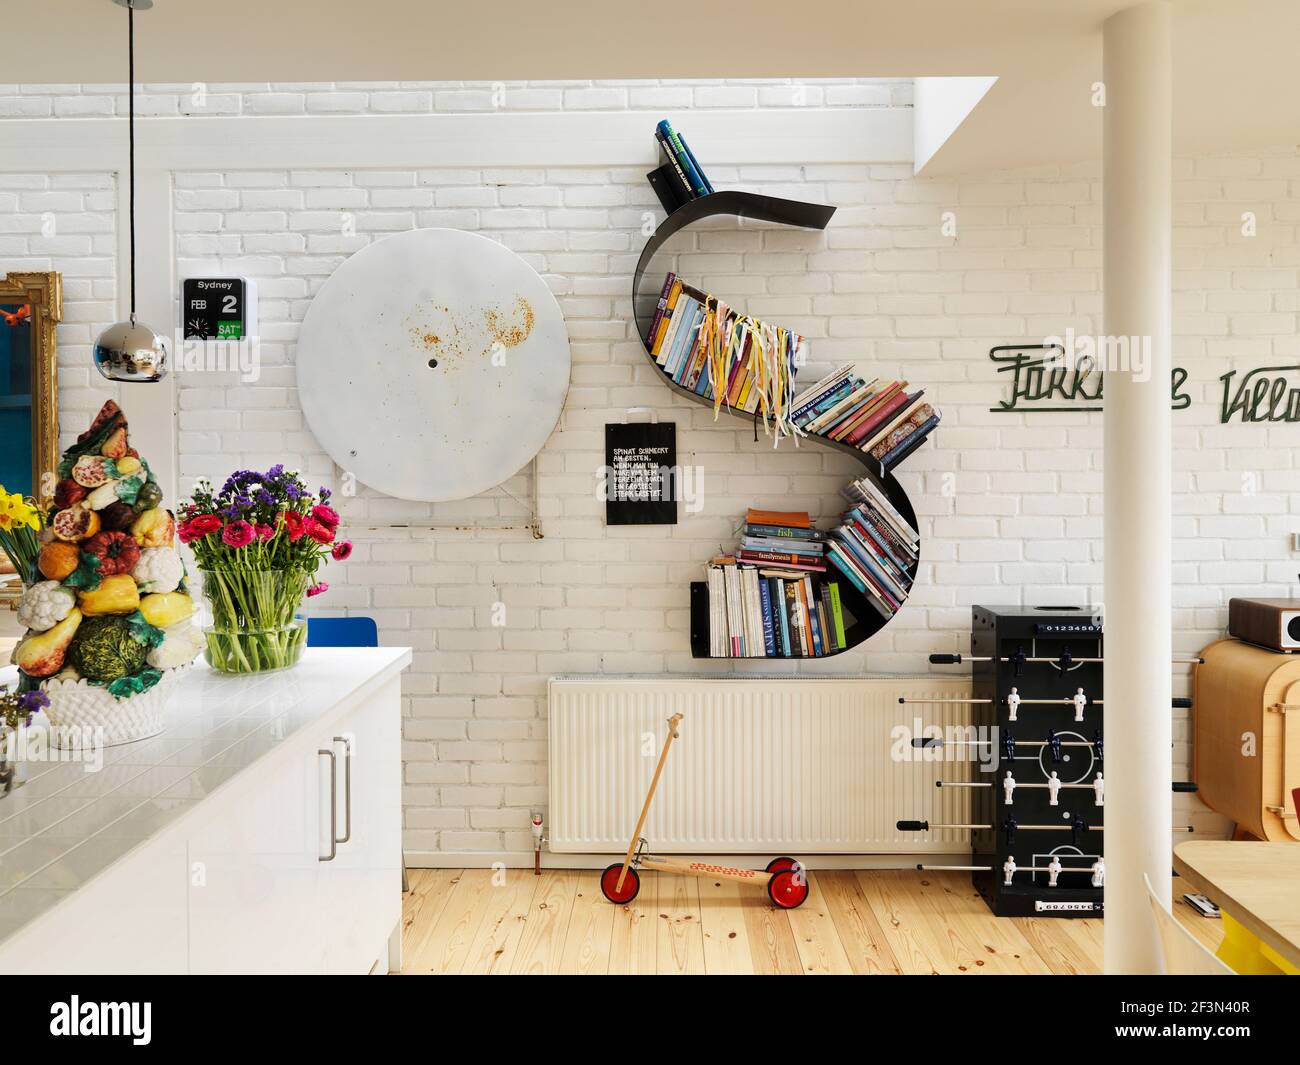 Kitchen with white painted brick wall and skylight, UK home Stock Photo